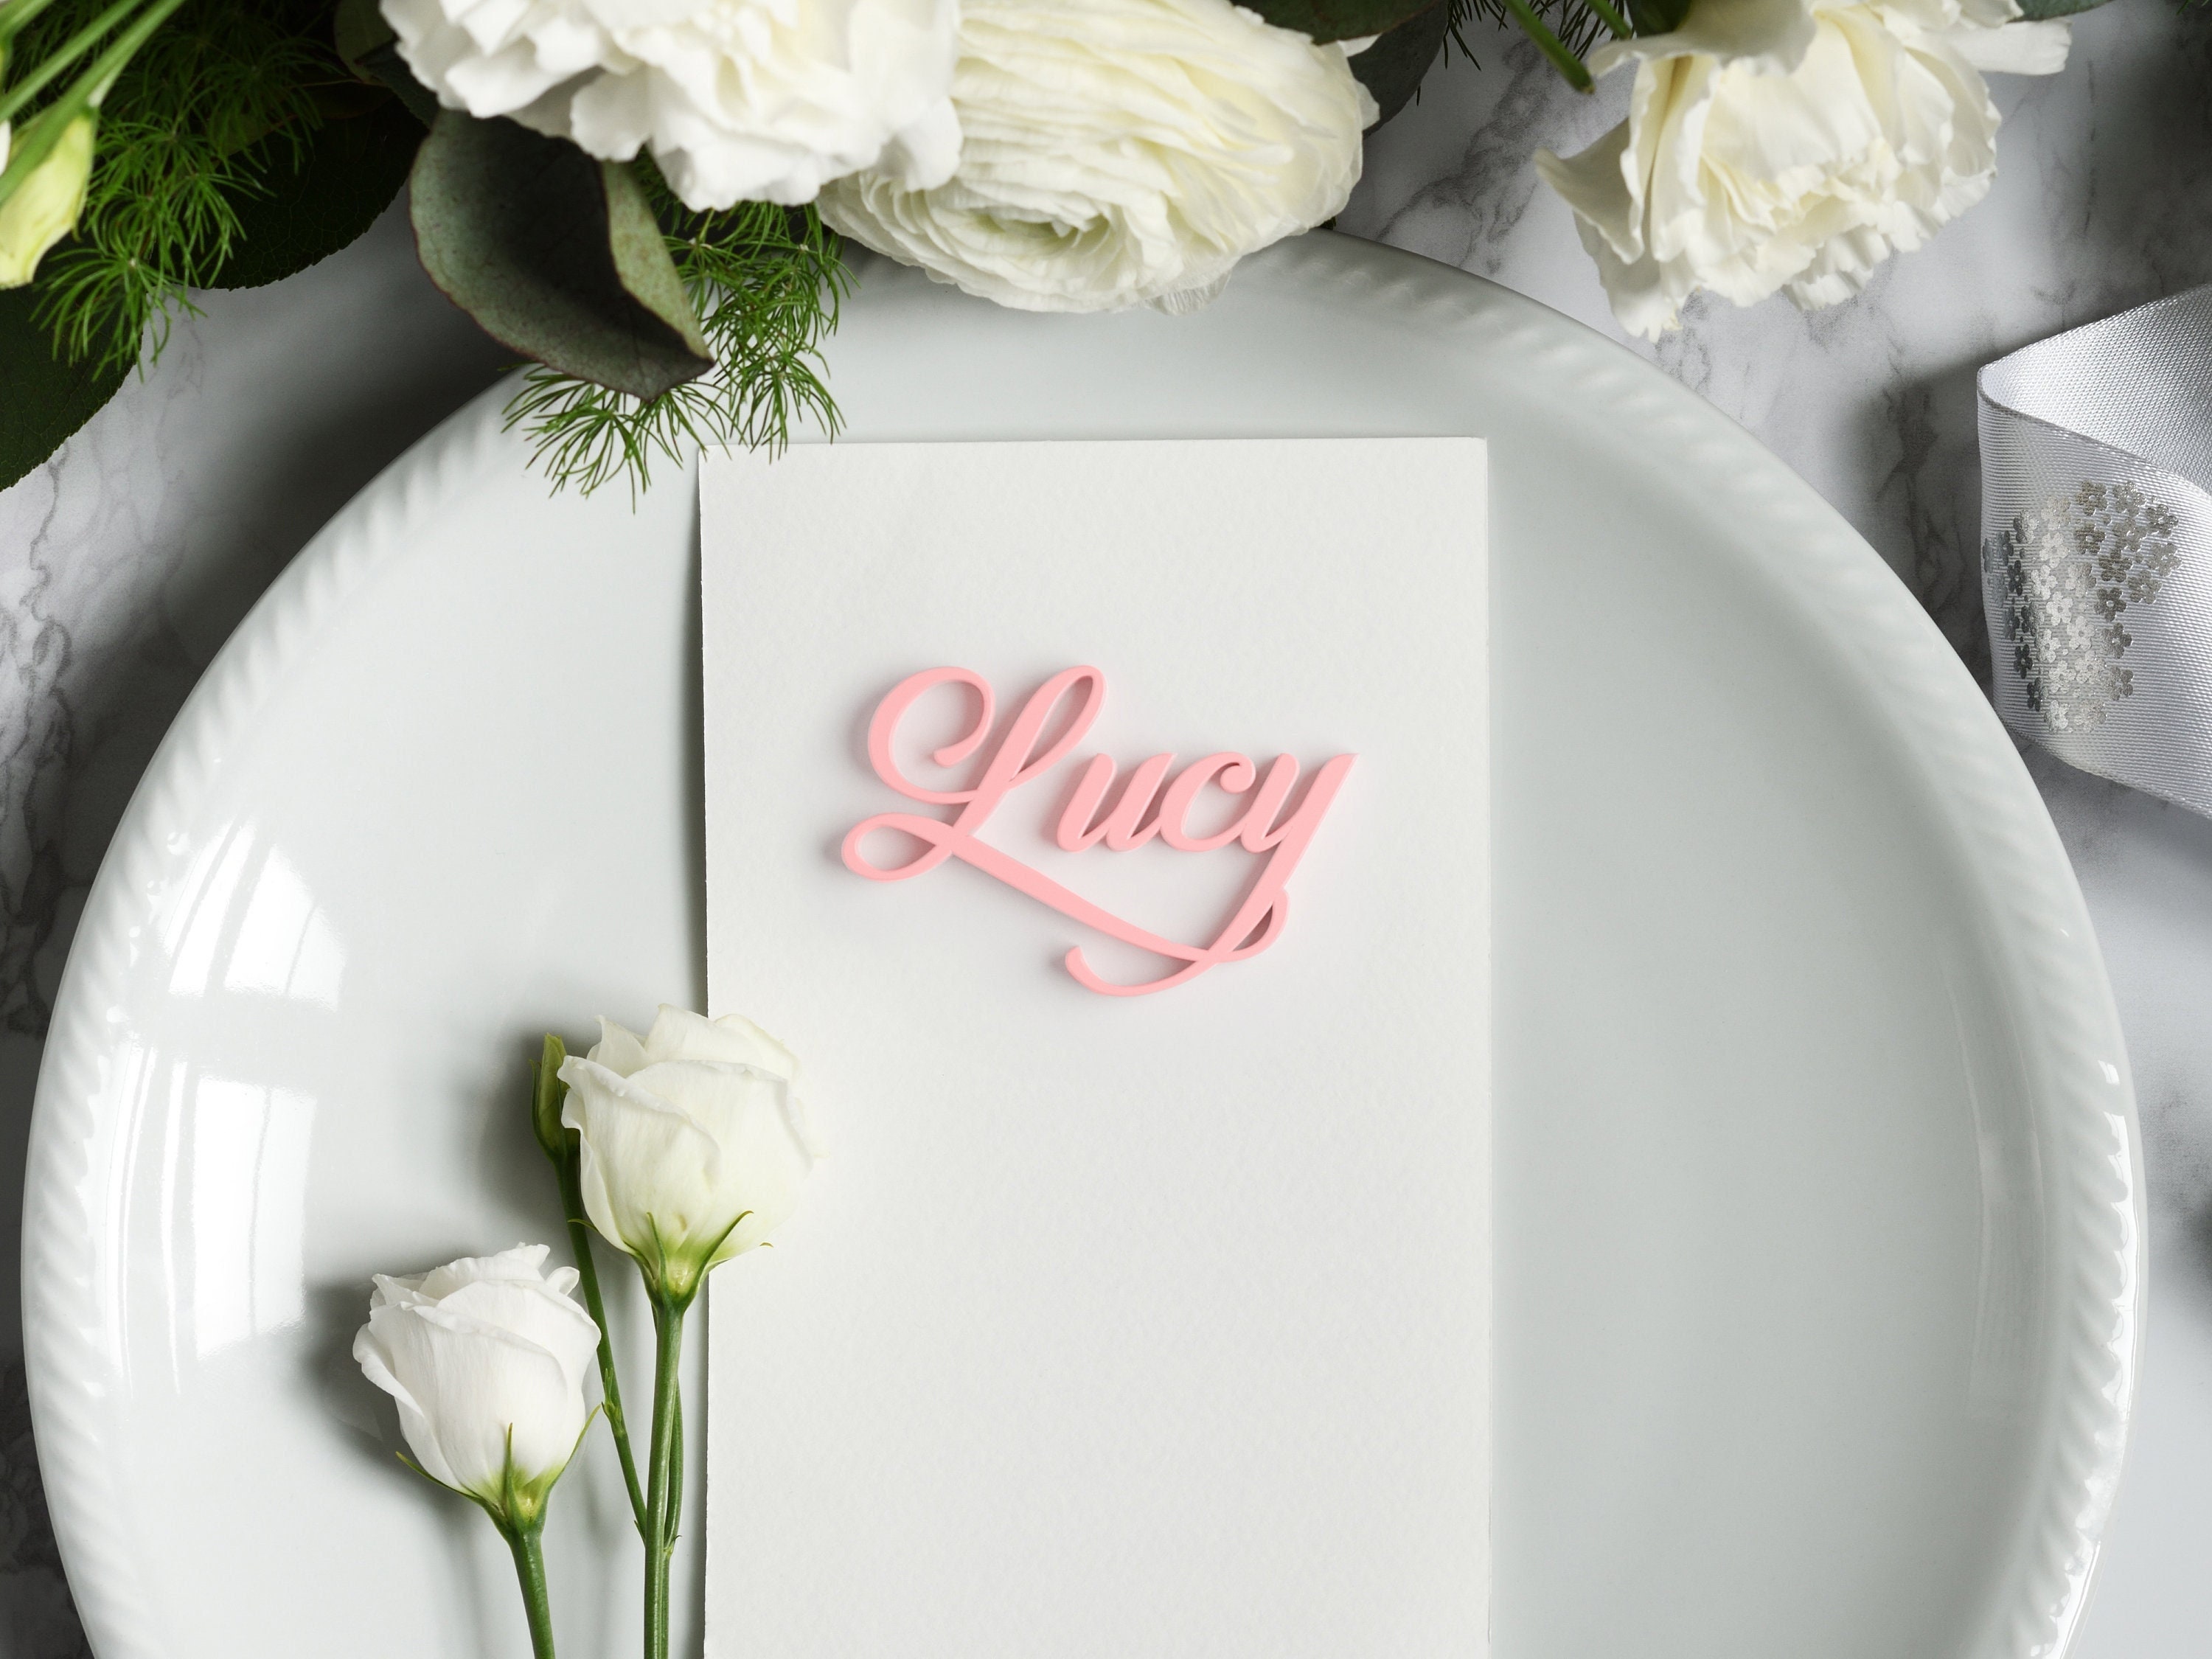 Pink Wedding Place Names Made From Acrylic. Custom Cards. Name Tags Personalised For Weddings, Party’s, Events